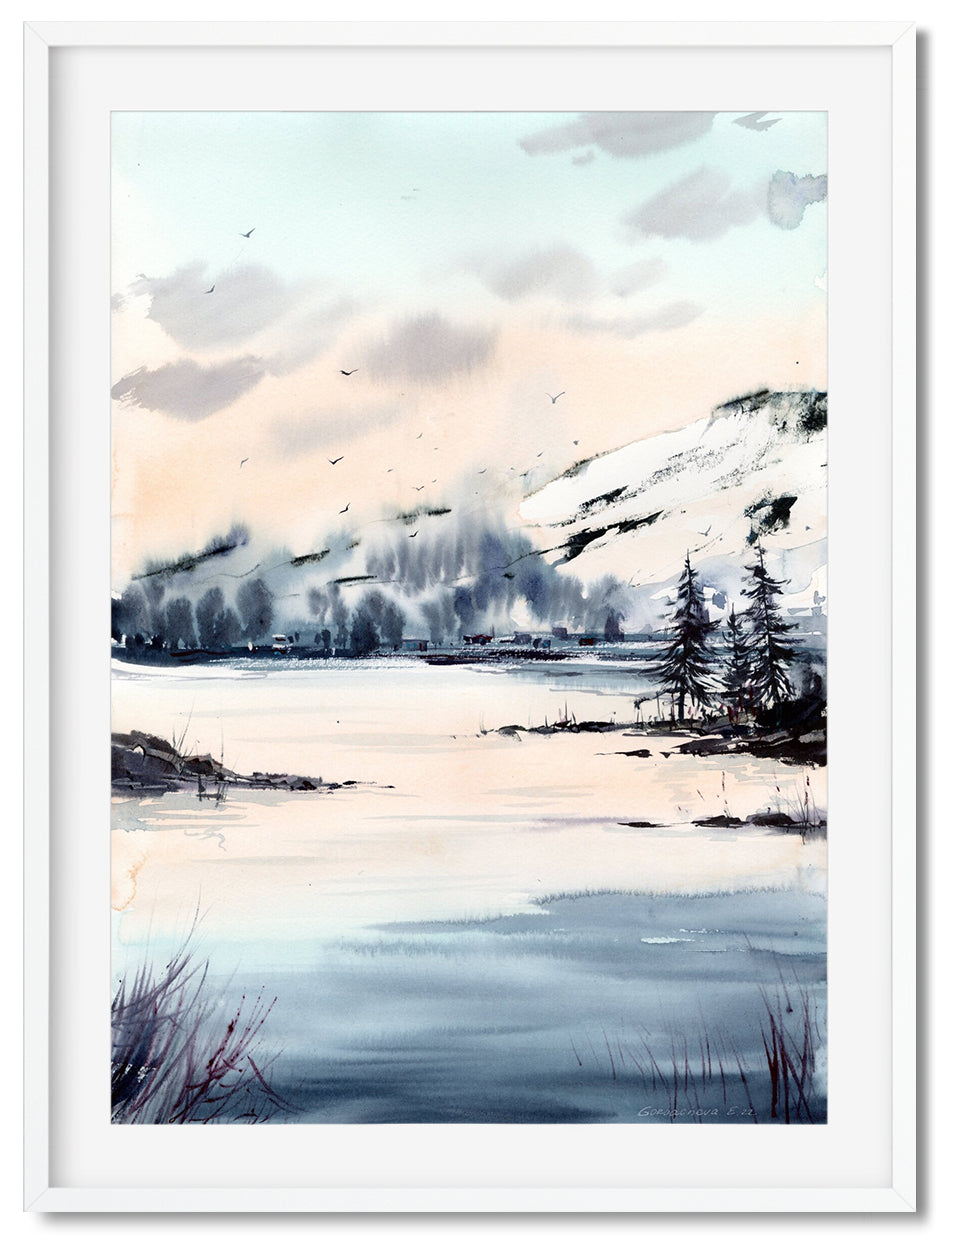 Mountain Lake Painting Original Watercolor, Abstract Forest Art, Nature Landscape, Modern Wall Decor, Mountains, Vanilla Sky, Gift For Him